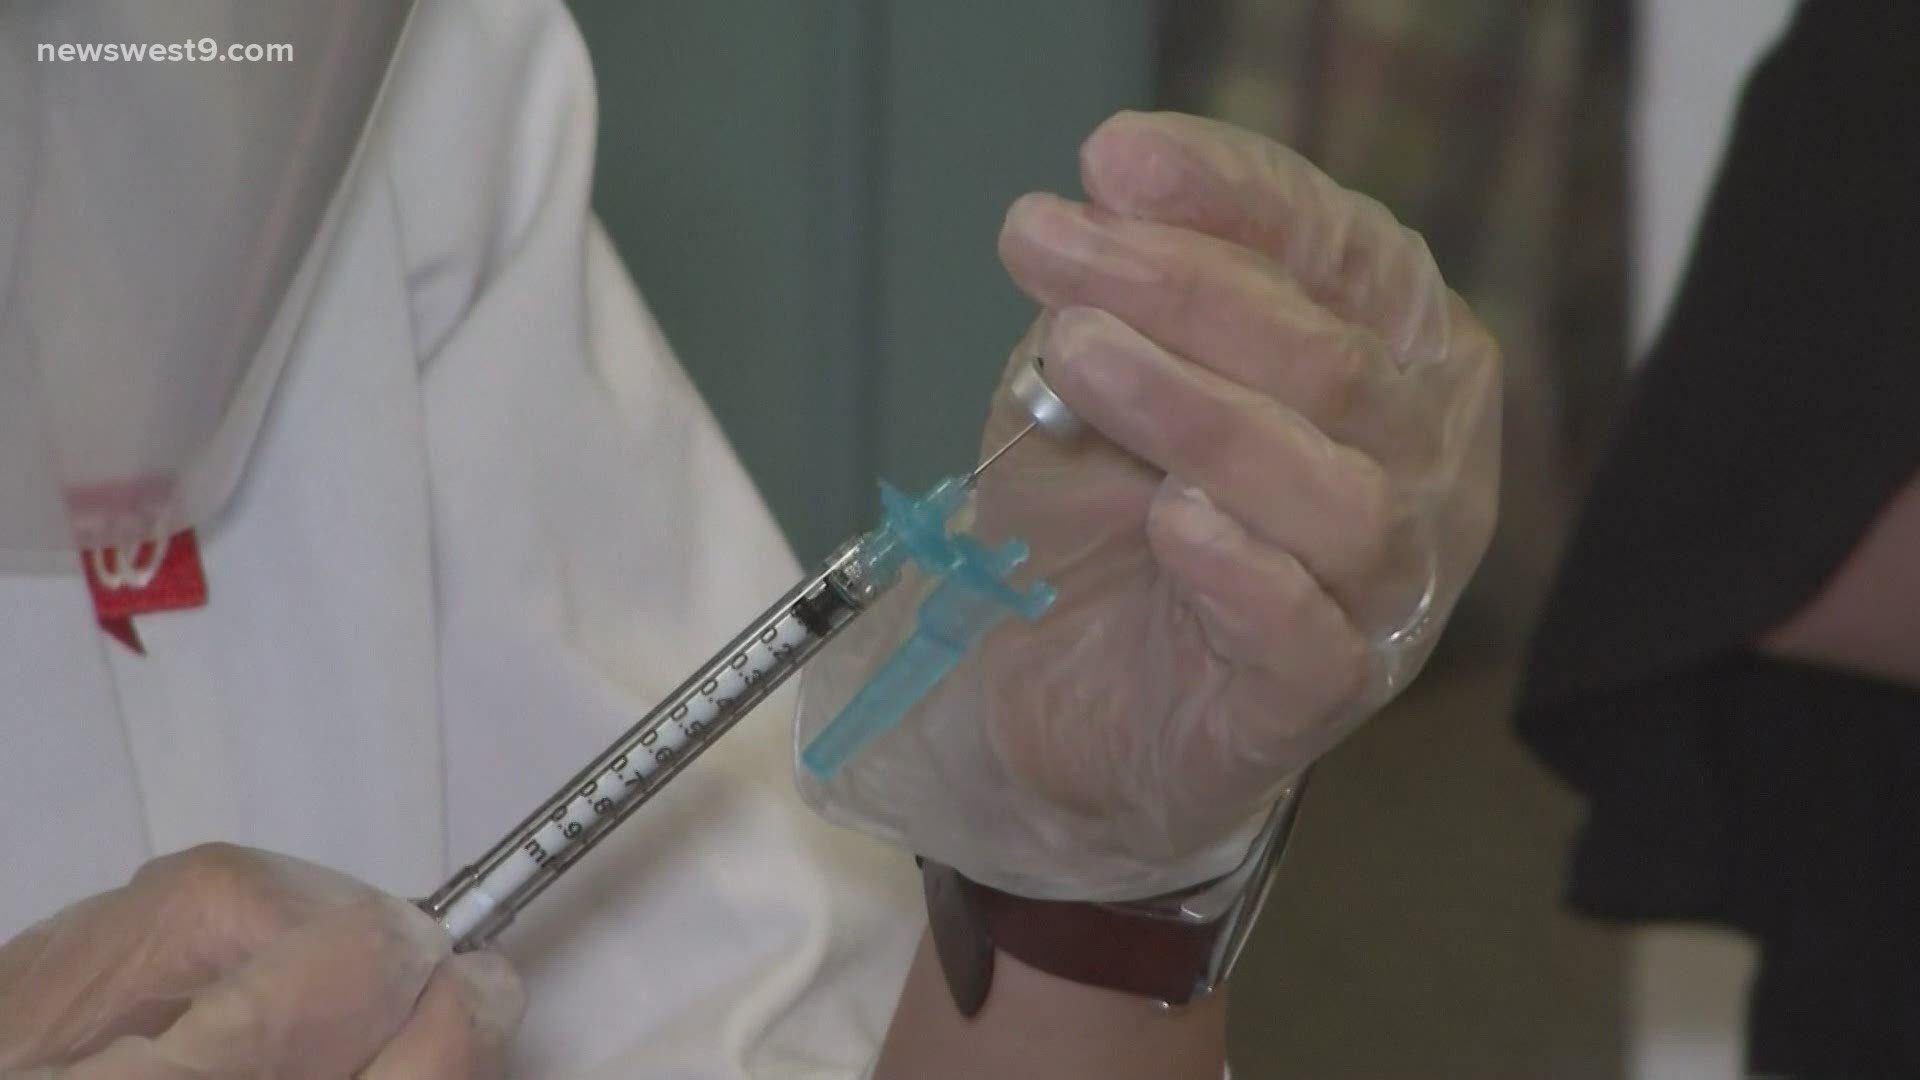 Starting Jan. 25, Midland Memorial Hospital will vaccinate up to 1,000 people a day at the Horseshoe Arena.